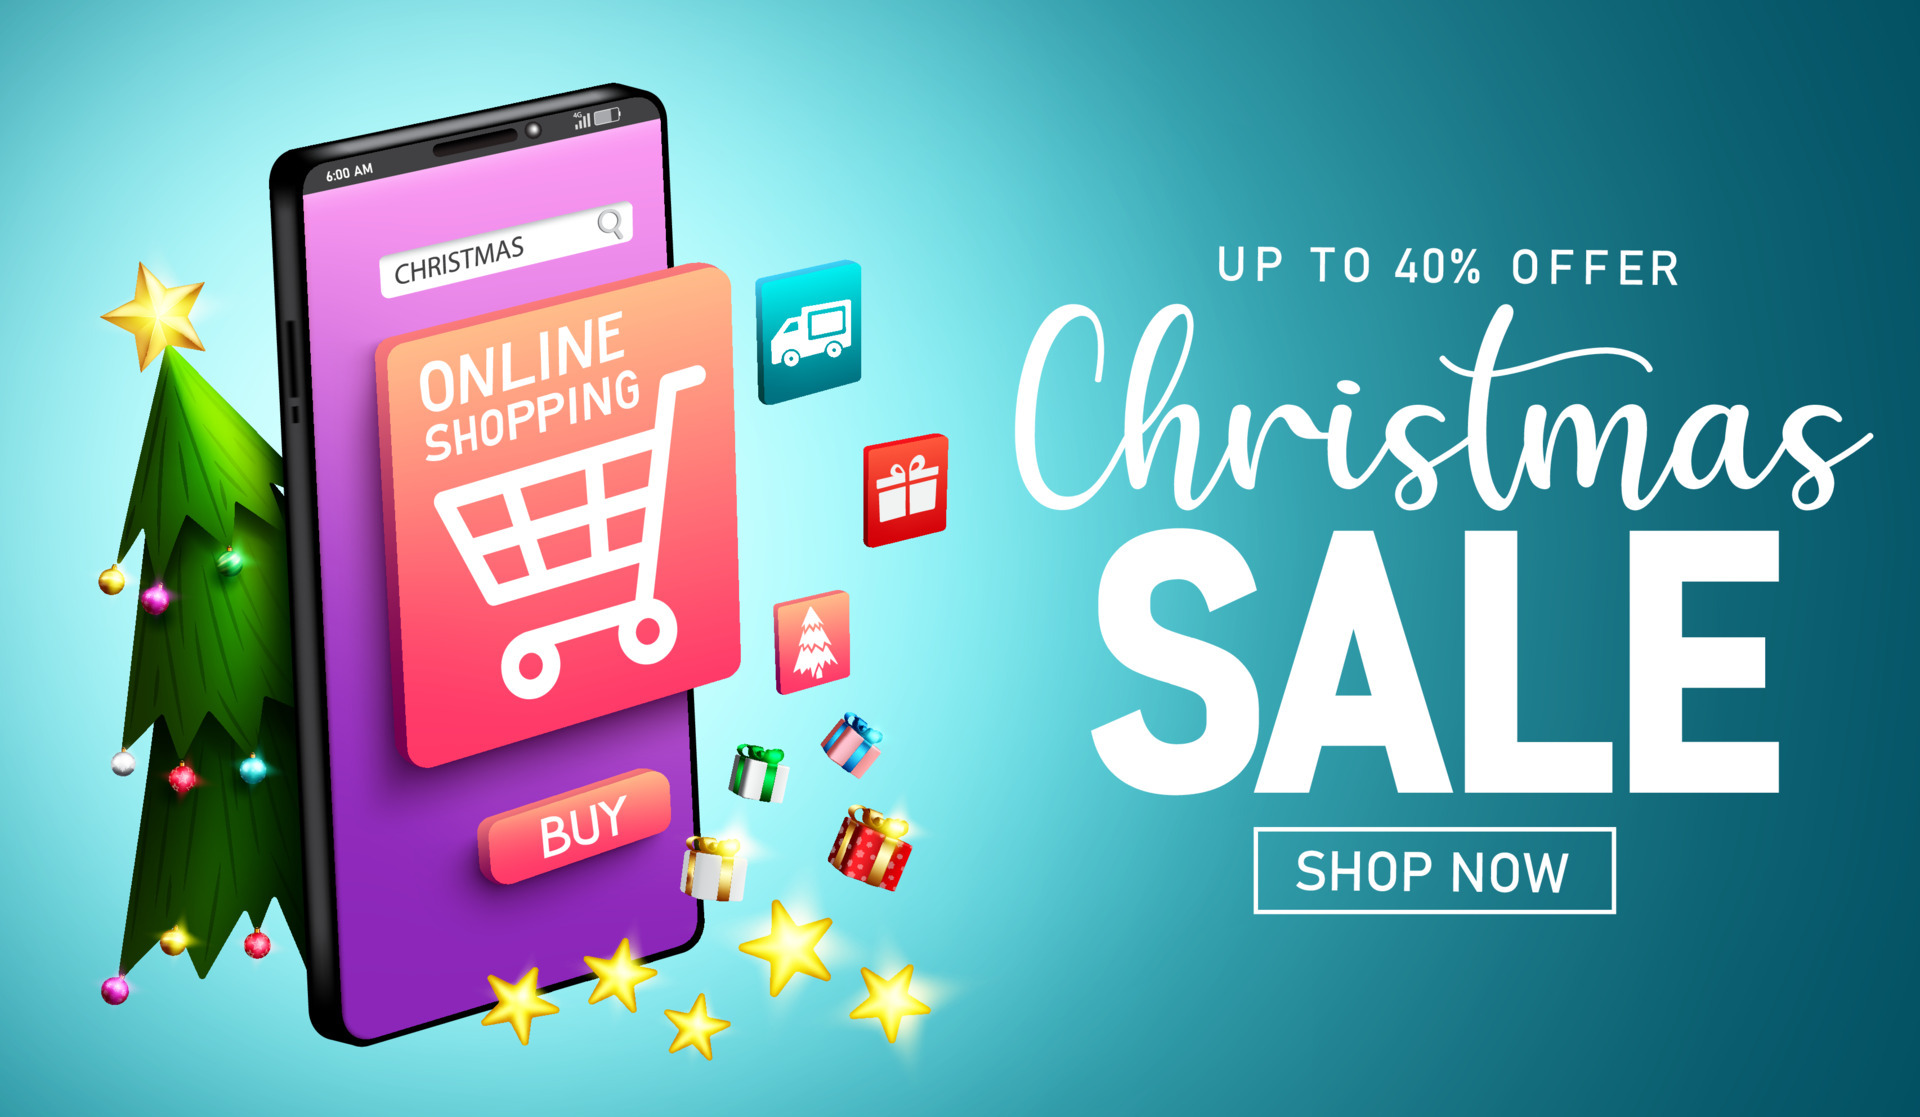 christmas-online-sale-banner-design-christmas-sale-text-with-online-mobile-shopping-app-for-xmas-virtual-shop-promotion-ads-illustration-vector.jpg